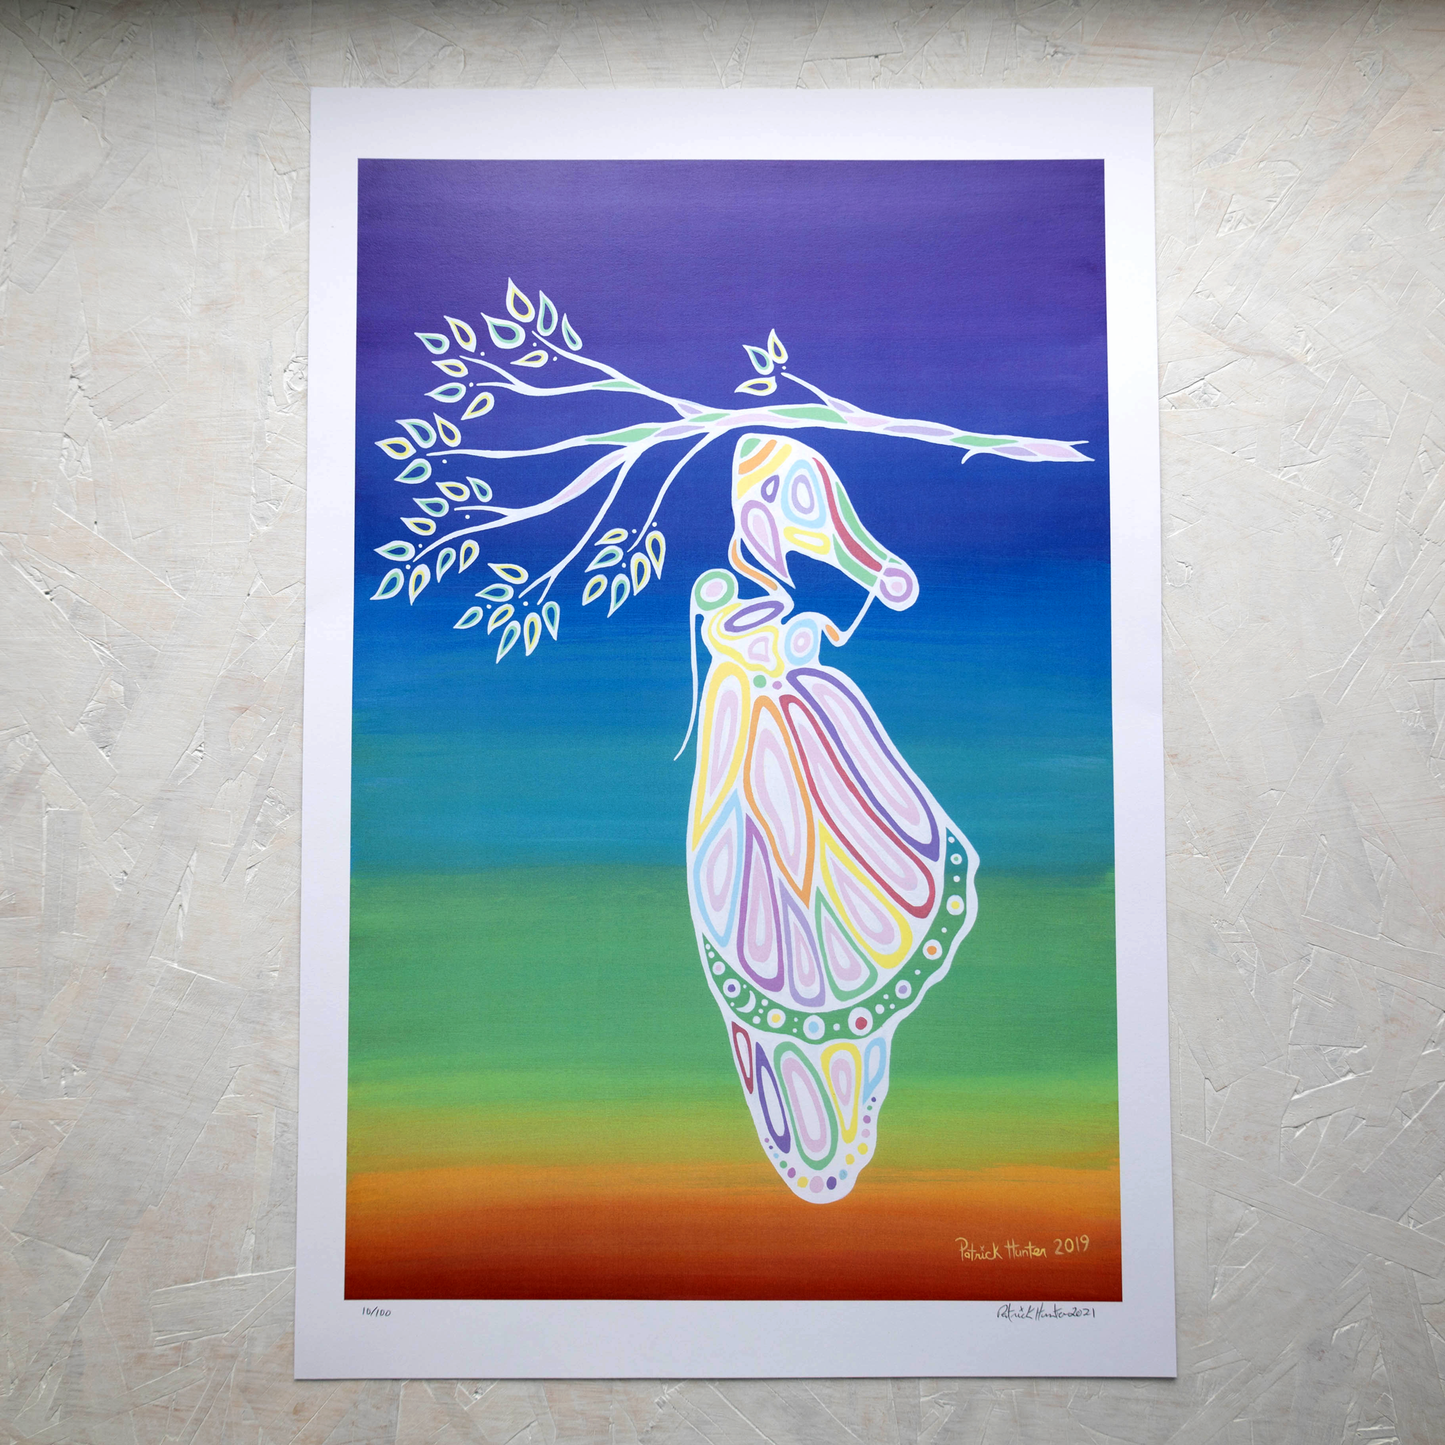 Print of Patrick Hunter's painting of a butterfly emerging from a cacoon on a rainbow gradient background in woodland art style.